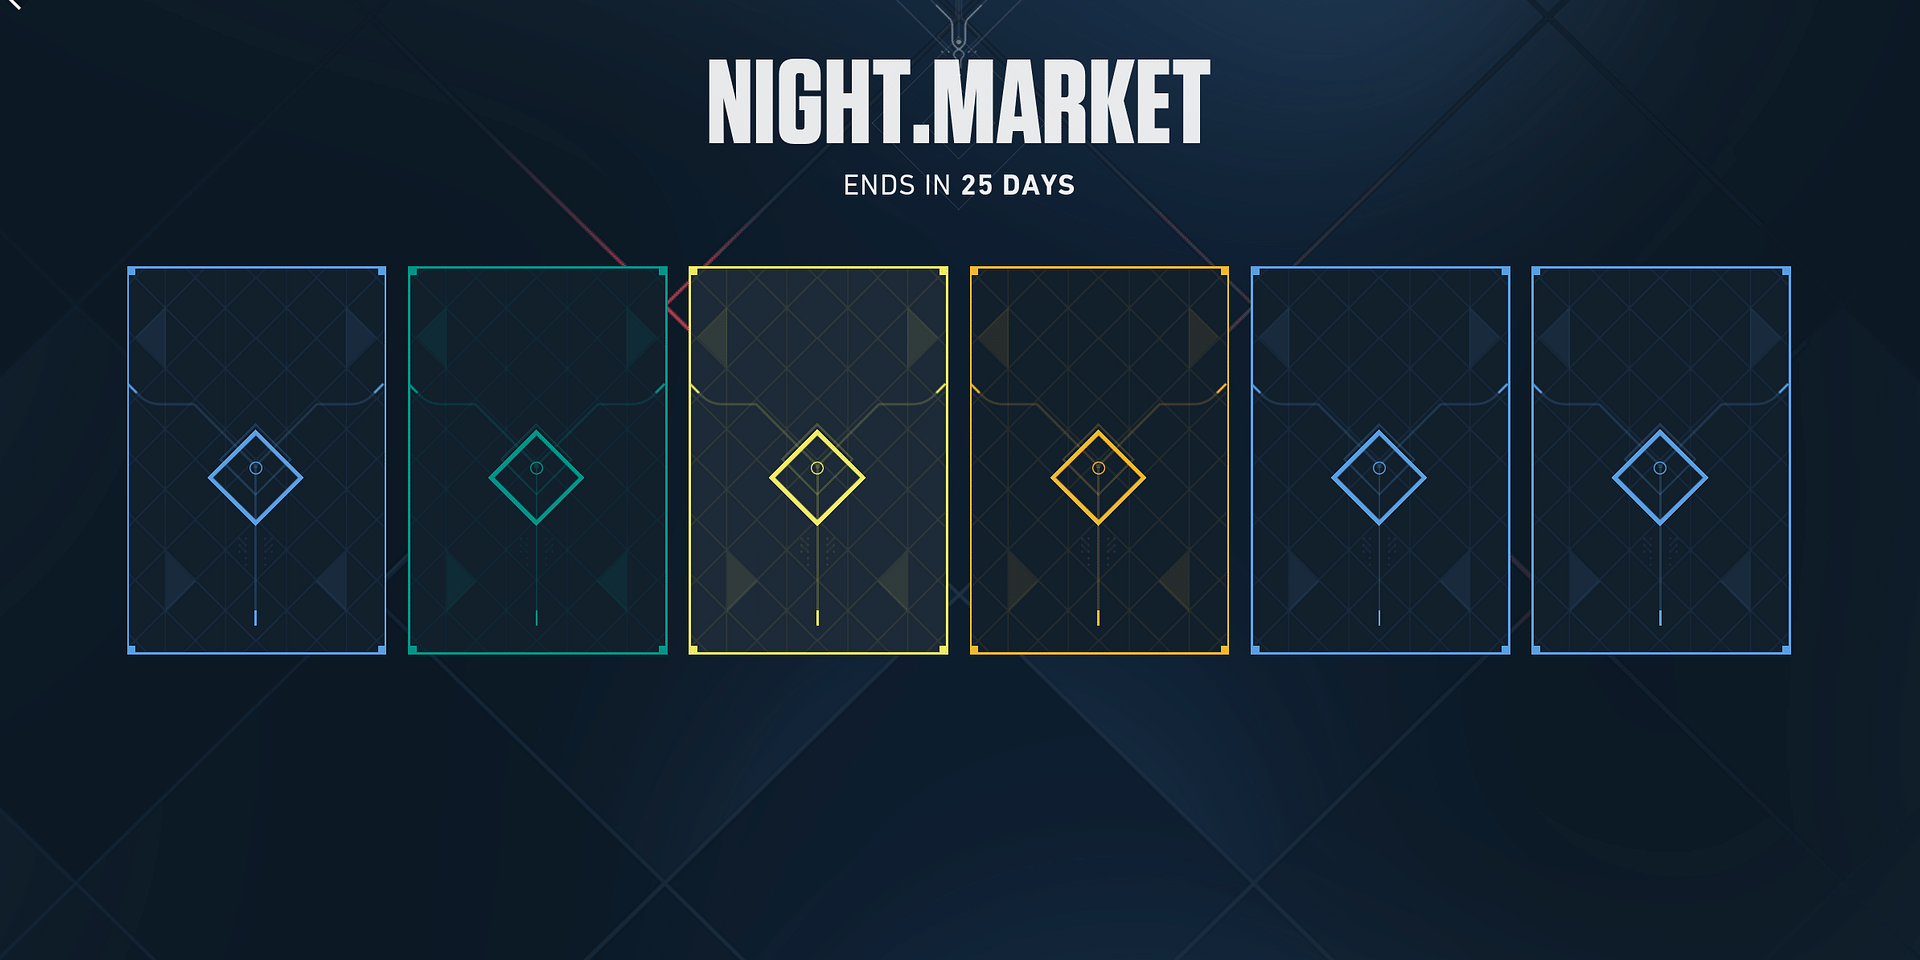 Valorant Night Market (August 2023): Expected Release Date and Duration